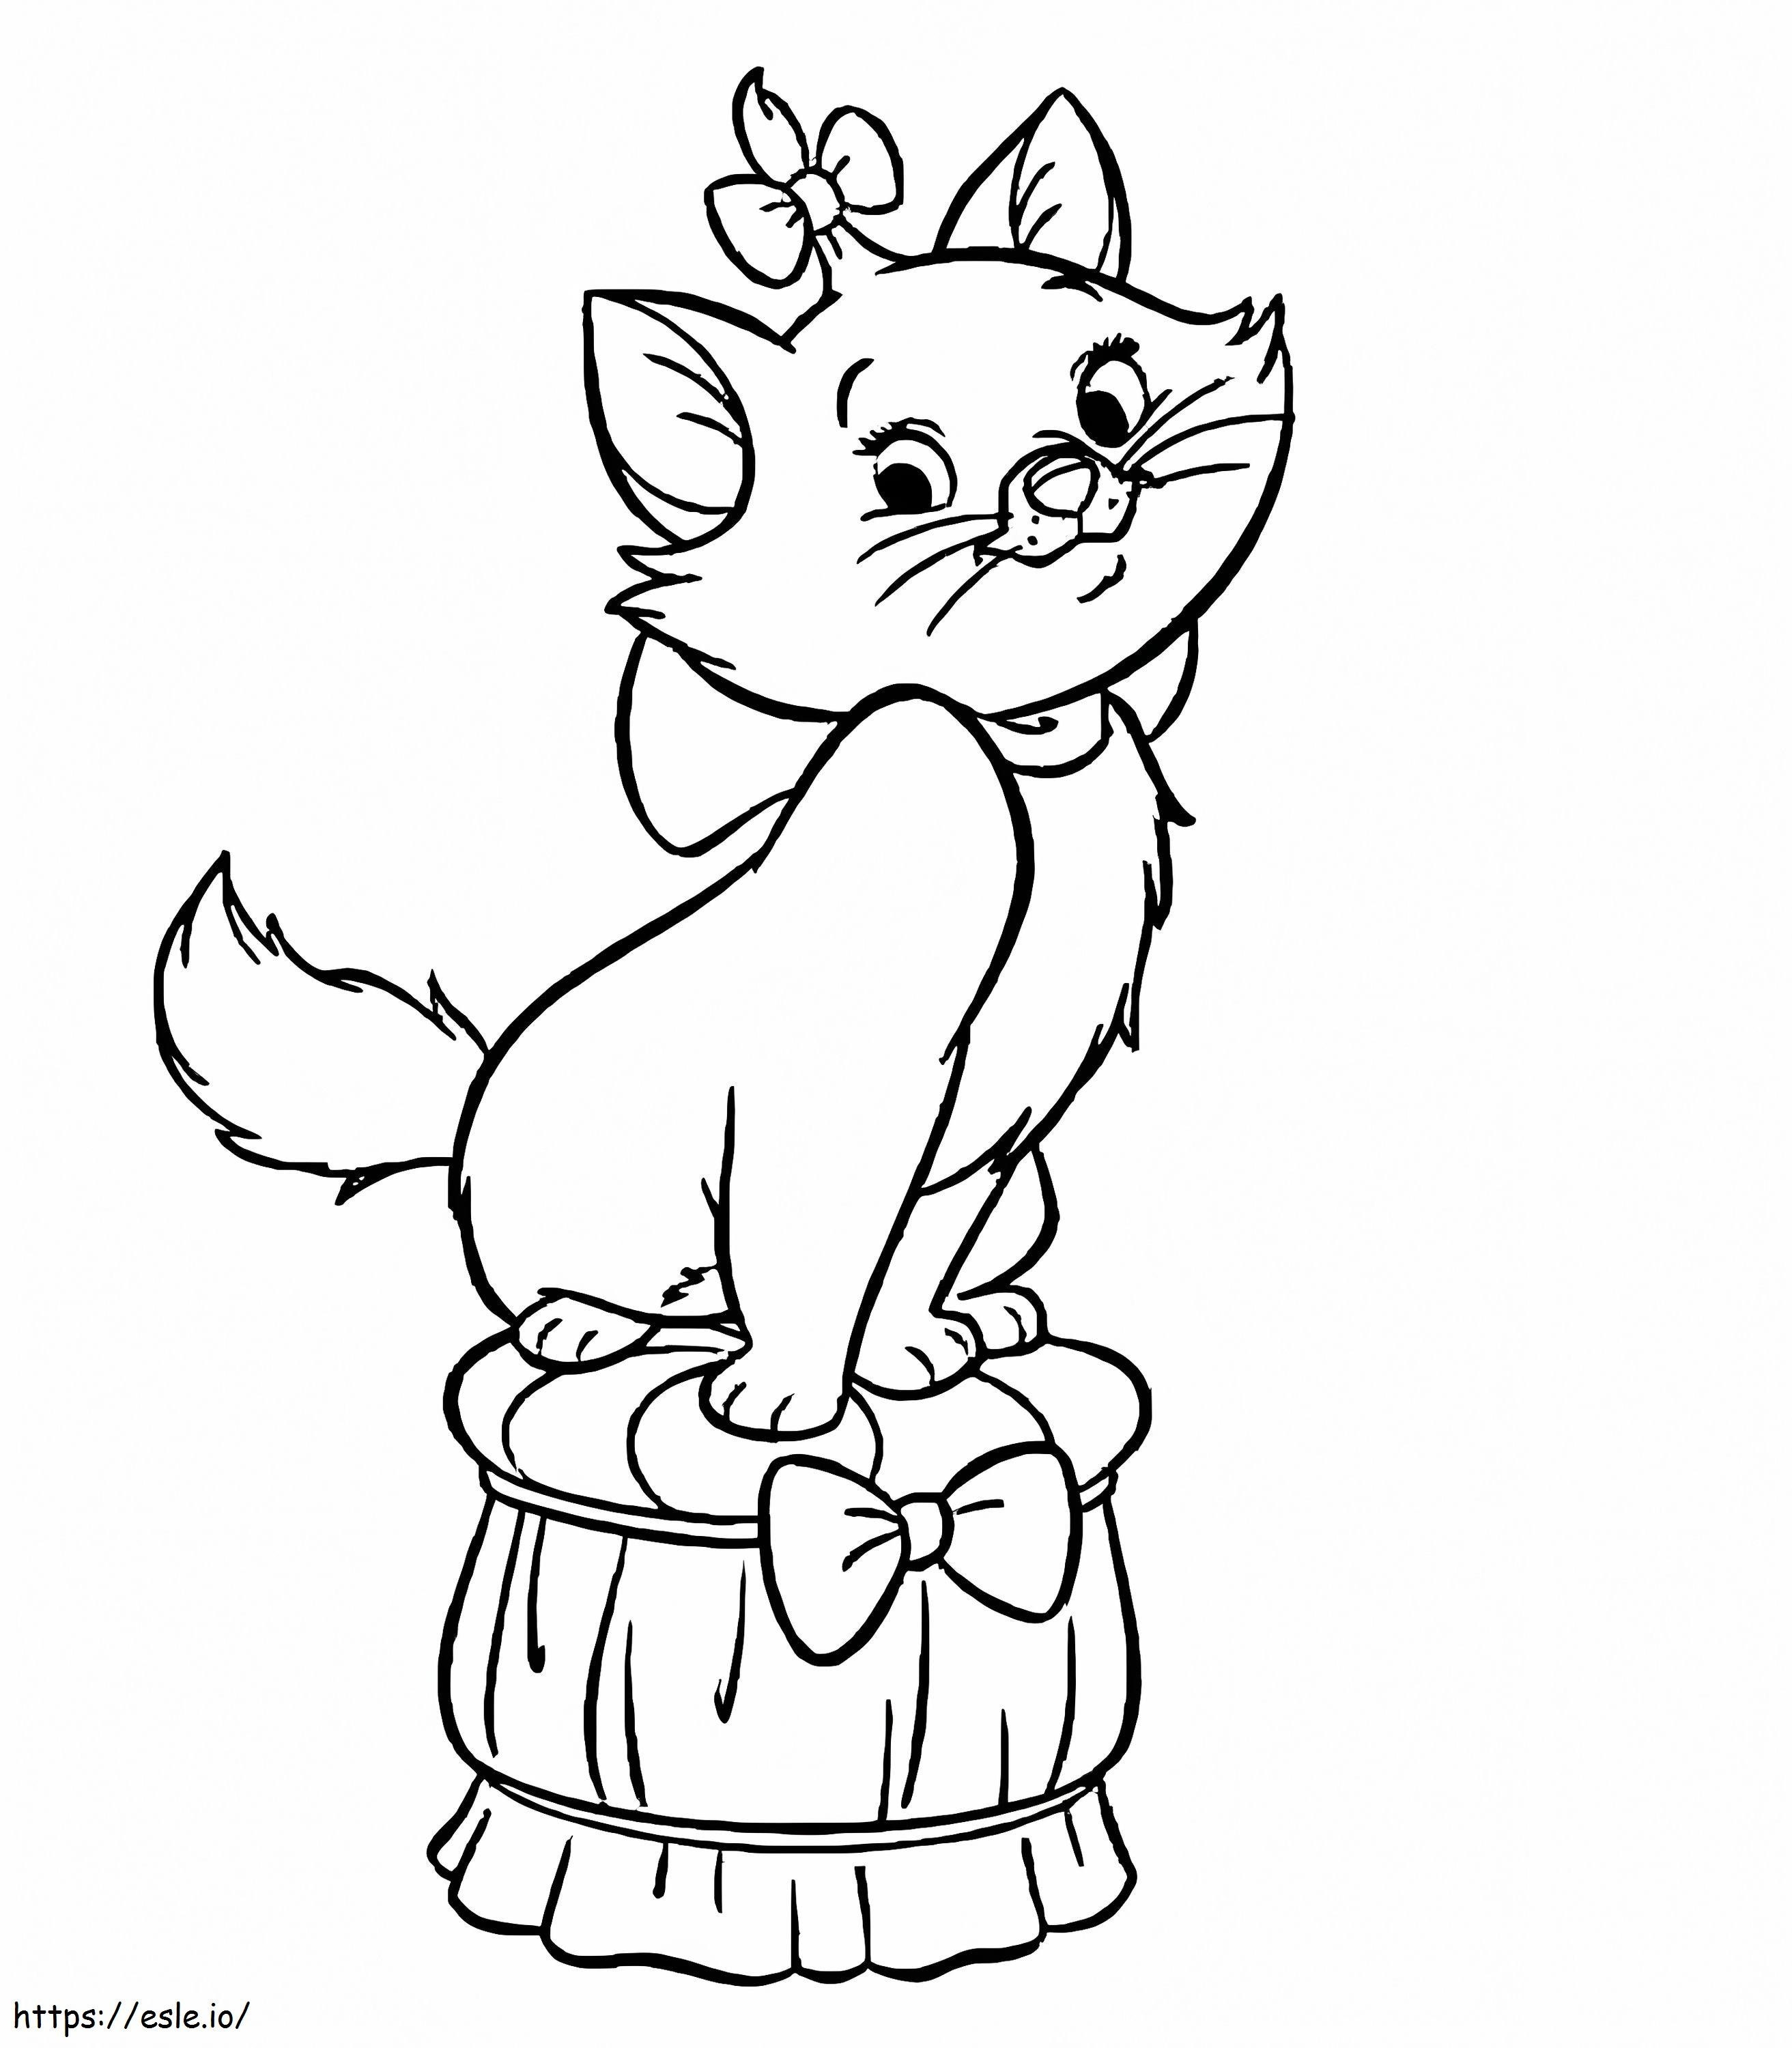 Marie Cat Sitting On A Chair coloring page